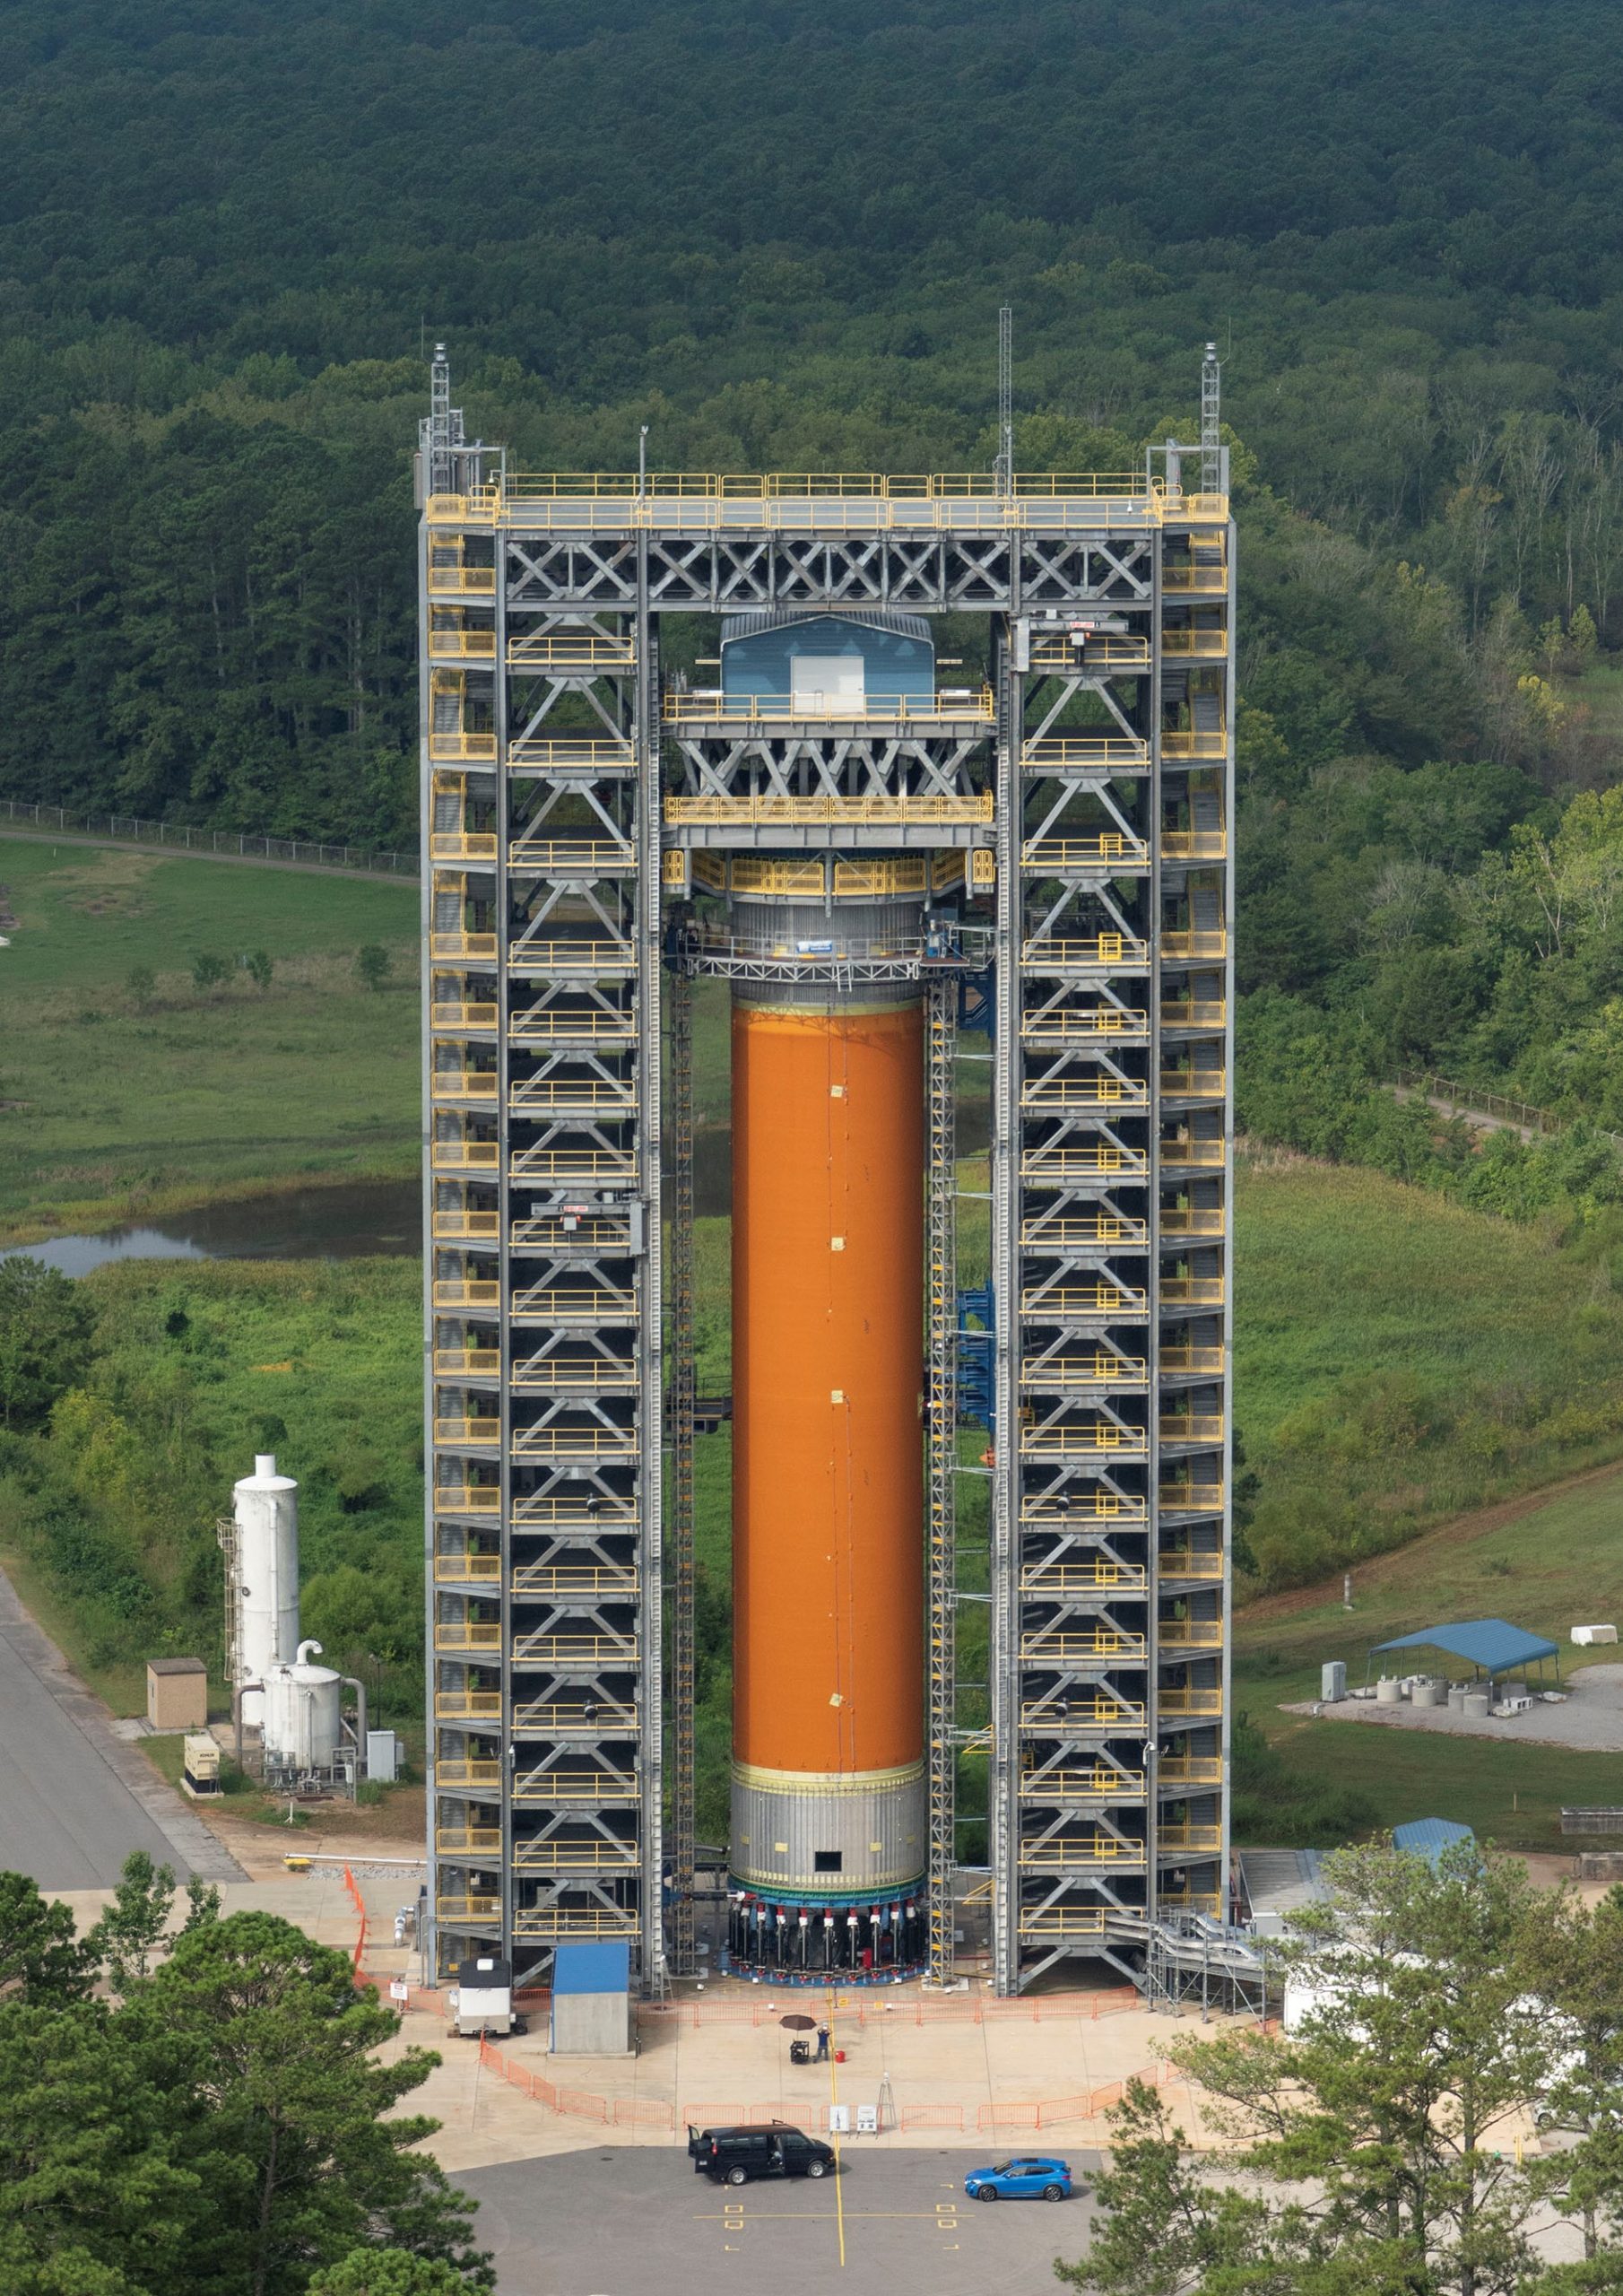 An aerial image of a space launch test stand